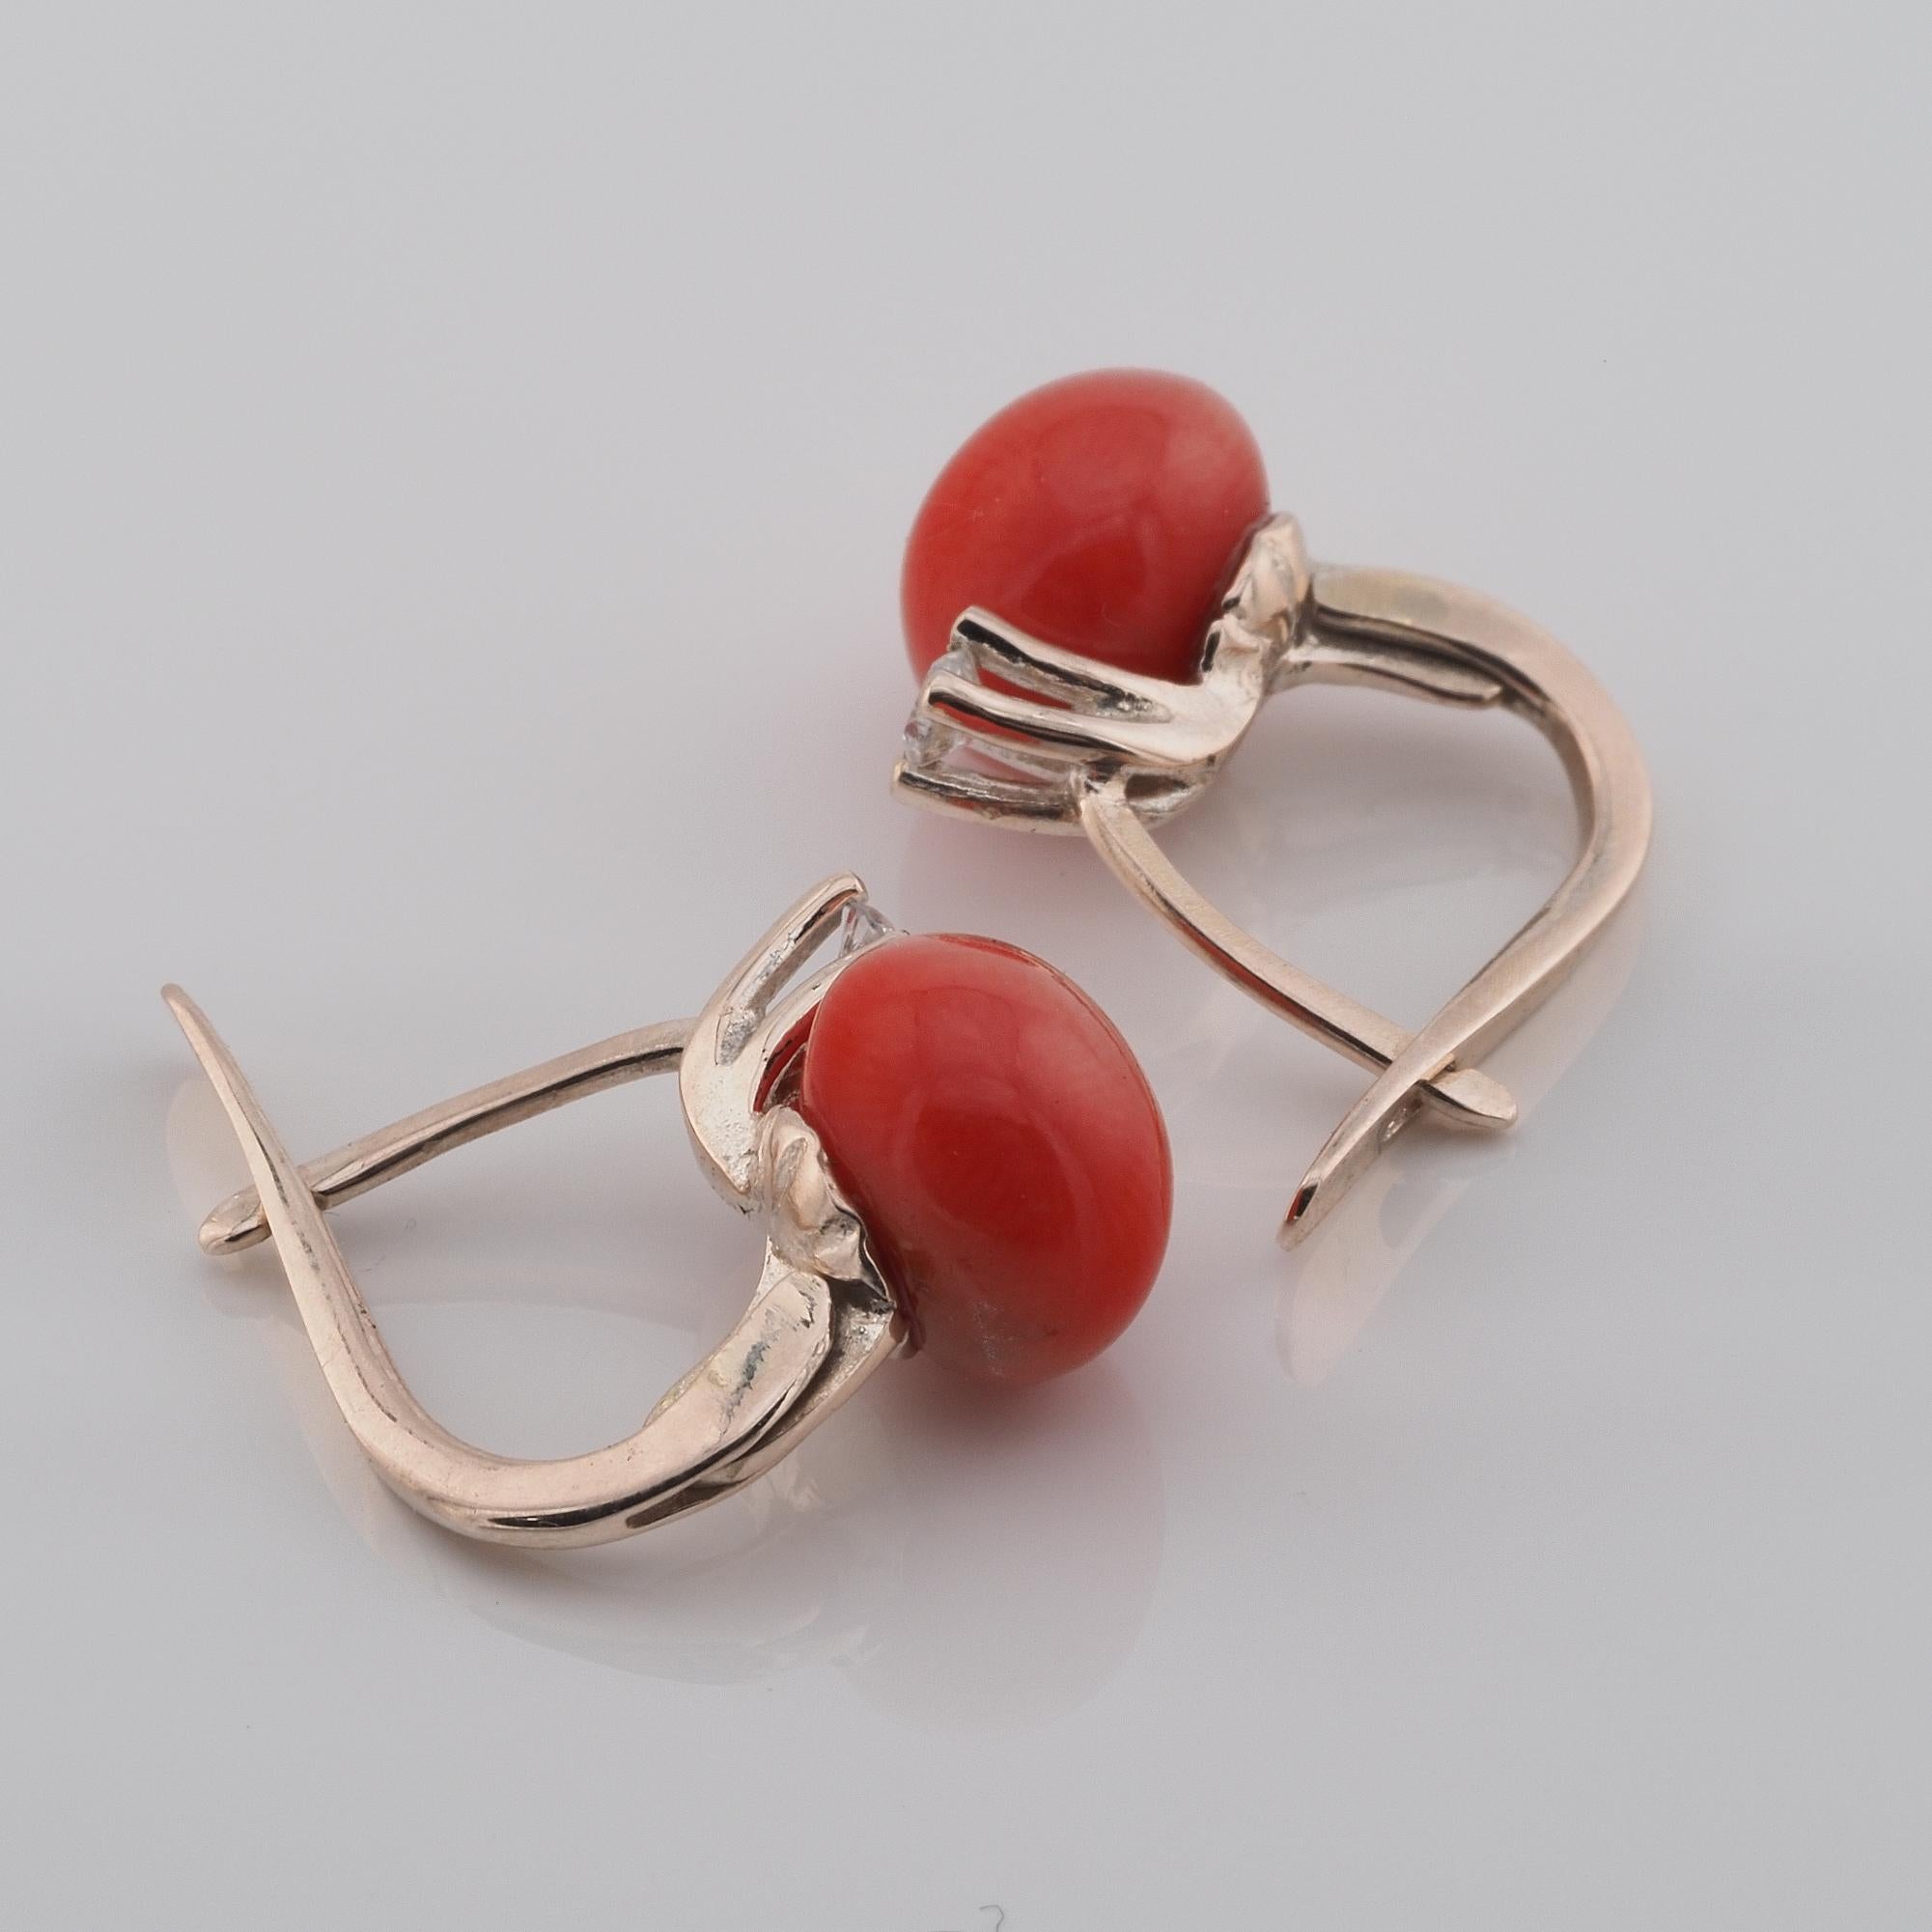 Italian Monachina Earrings

Very pretty vintage style Italian Monachina earrings, the most wanted for all occasion in the Italian tradition with a round Red Coral cabochon all natural and untreated of 8 mm. diameter, topped by a solitaire